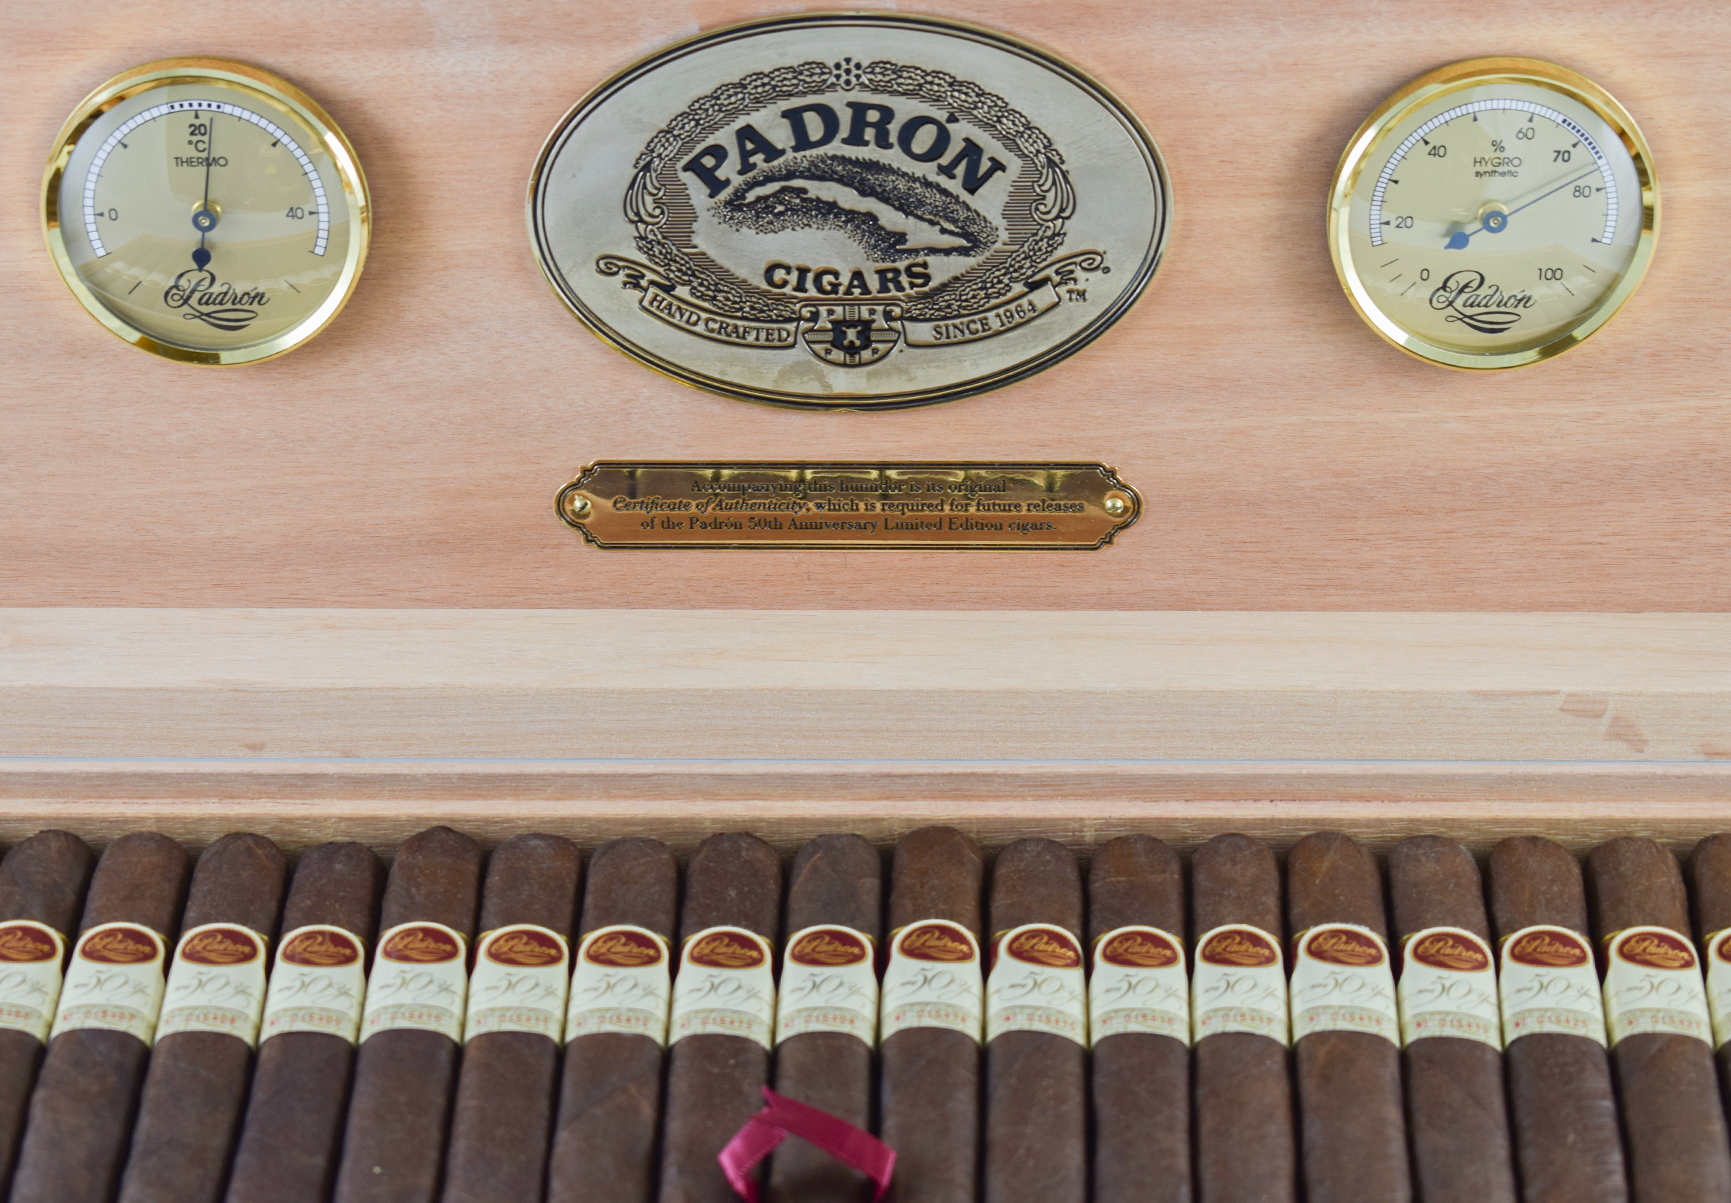 Padron cigars in a humidor